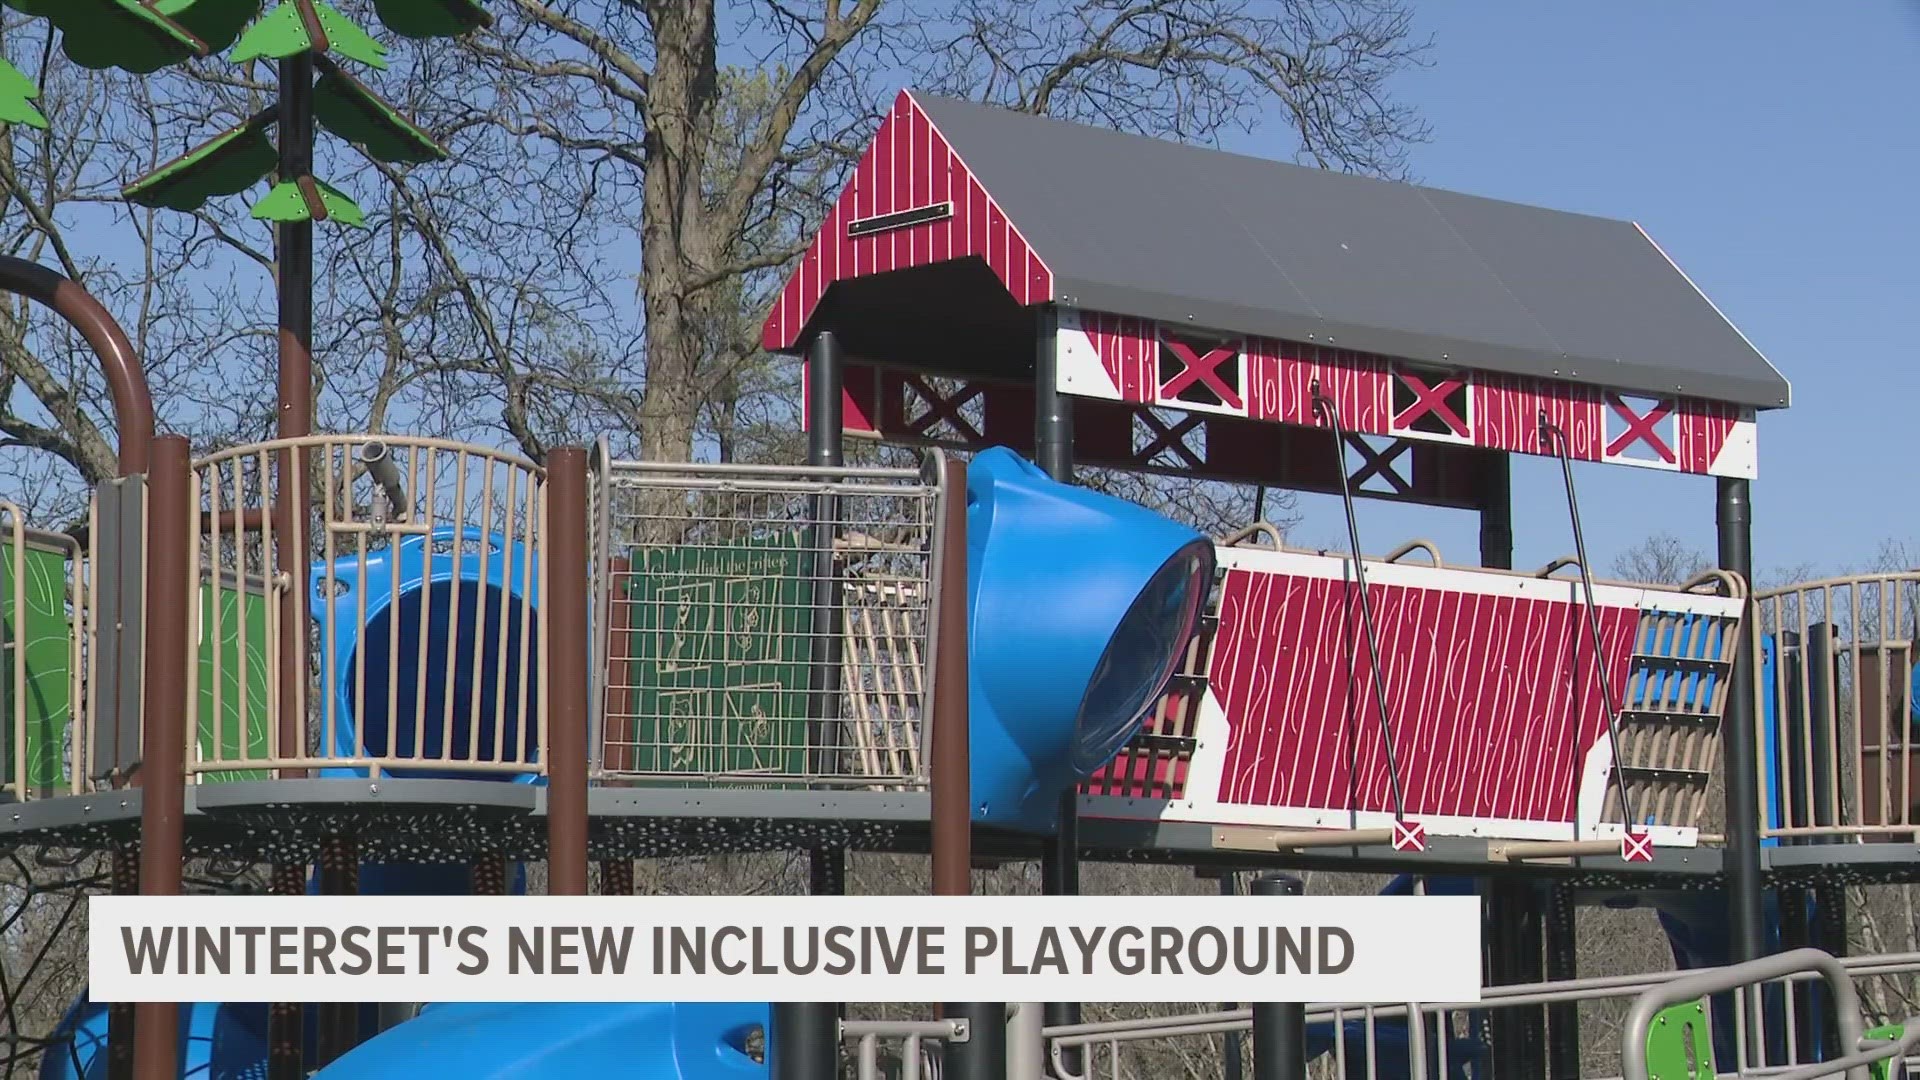 The new playground includes accessibility features like a grass turf, lots of ramps and a height-adjustable changing table.